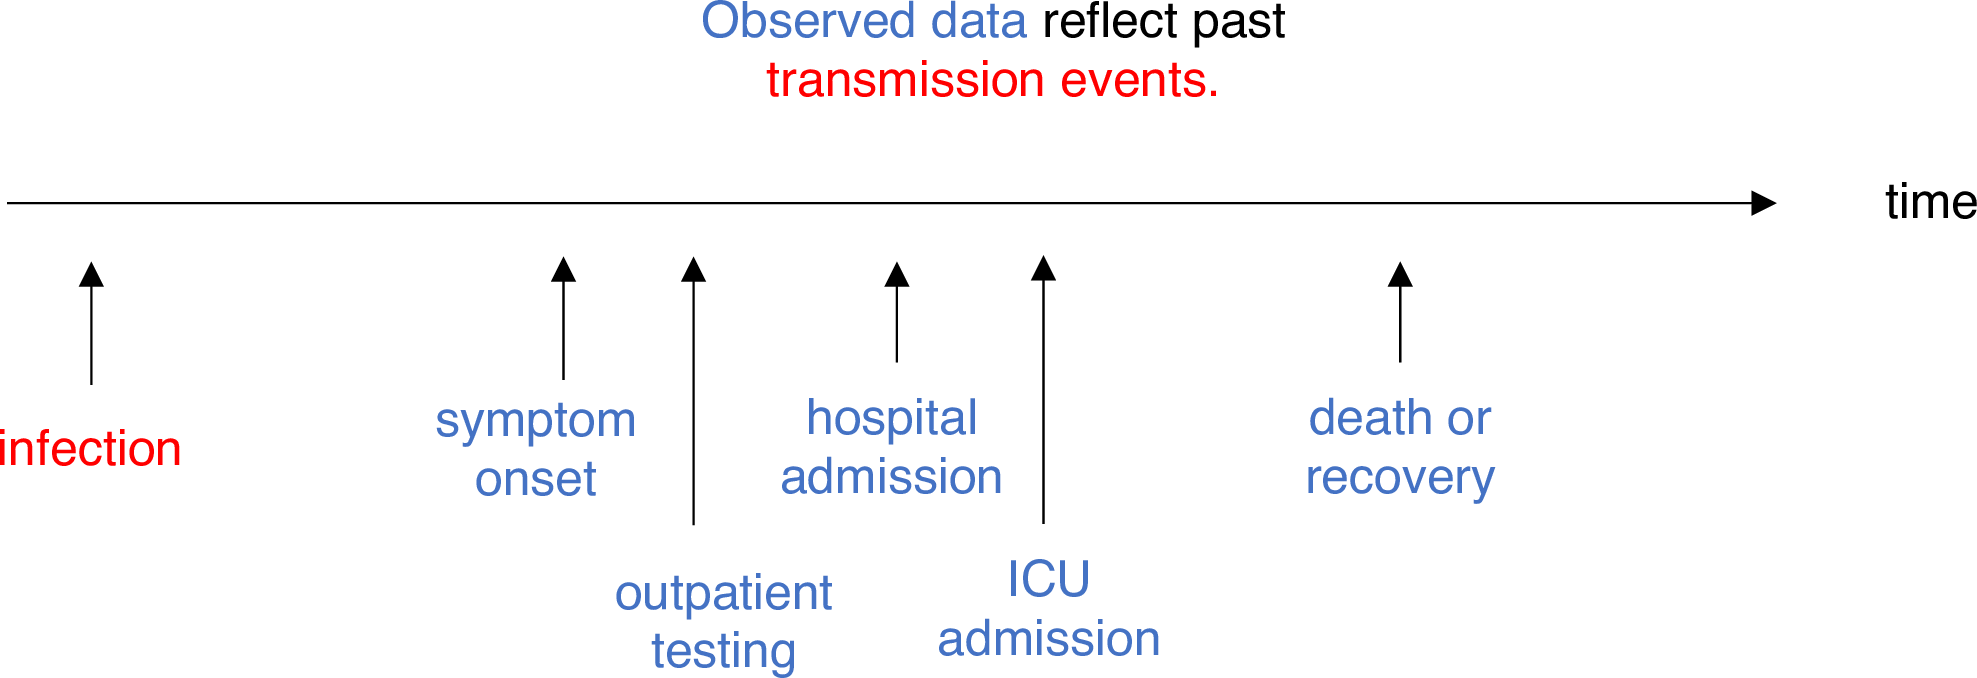 R_{t} is a measure of transmission at time t. Observations after time t must be adjusted. ICU, intensive care unit. From Gostic et al., 2020